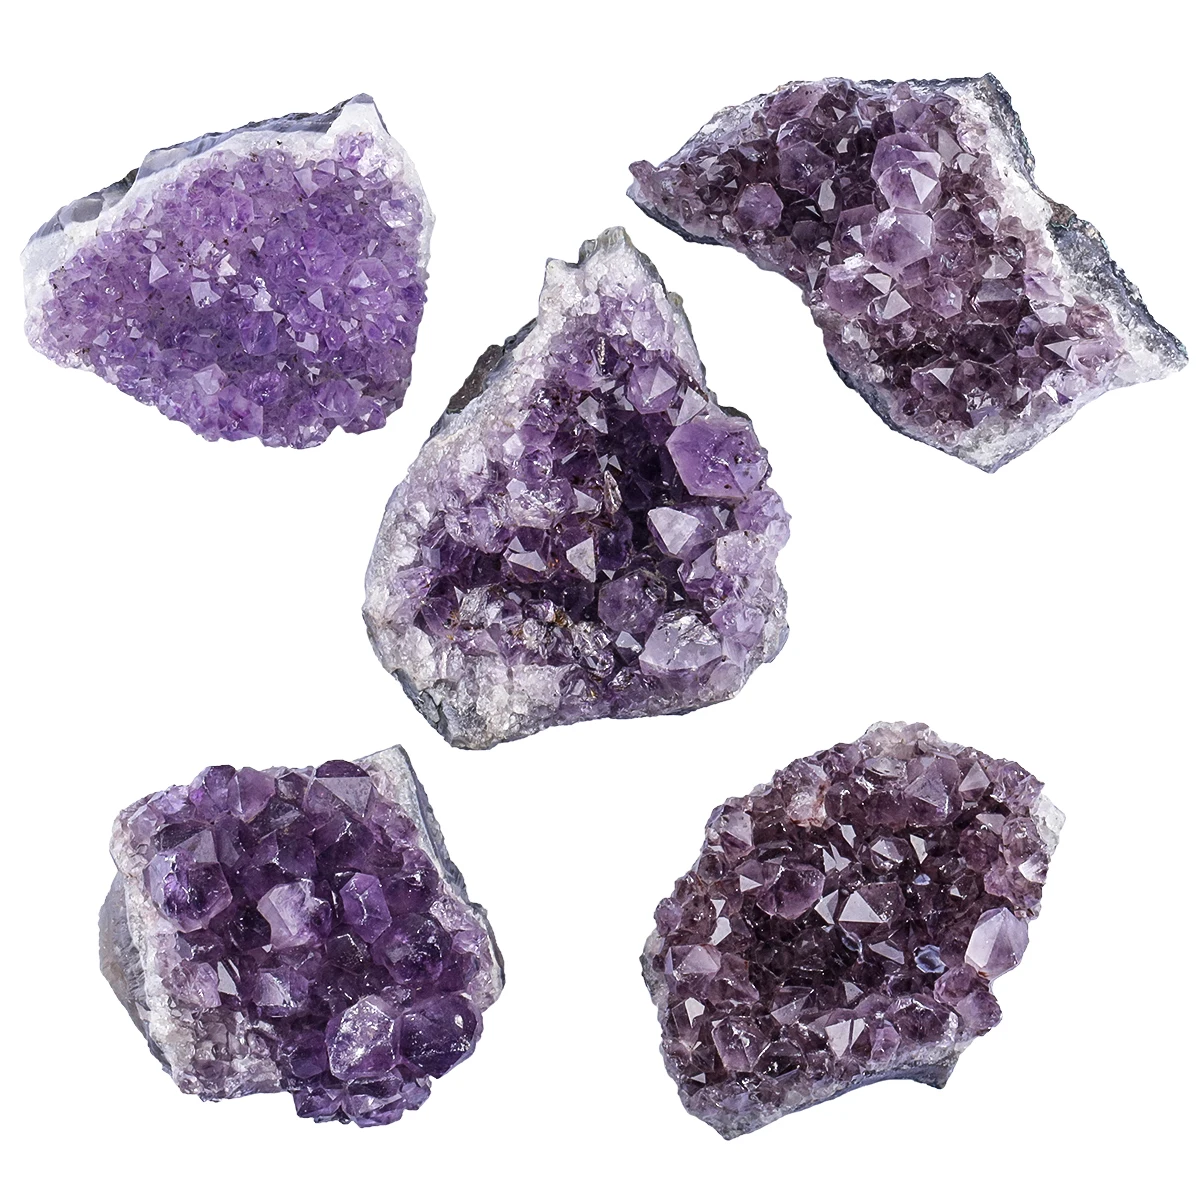 400g Natural Amethyst Cluster Healing Rough Gemstone Mineral Specimen Chakra Balancing For Home Decoration reiki love heart crystal money tree with rough amethyst cluster base natural minerals gemstone crafts gift nordic home ornaments